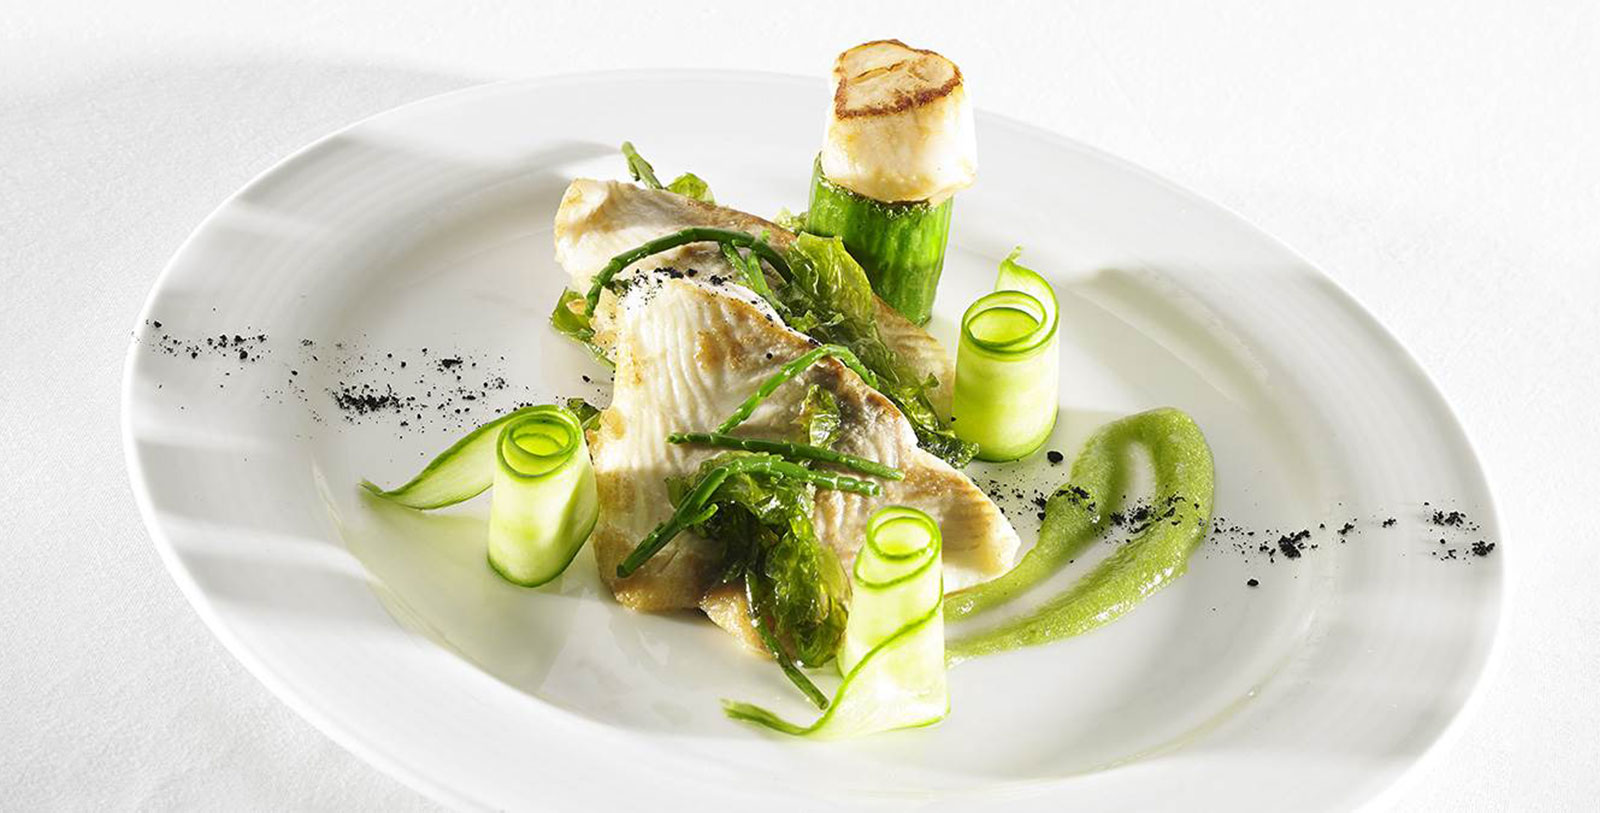 Taste the best of the Kerry countryside at the Garden Room Restaurant.